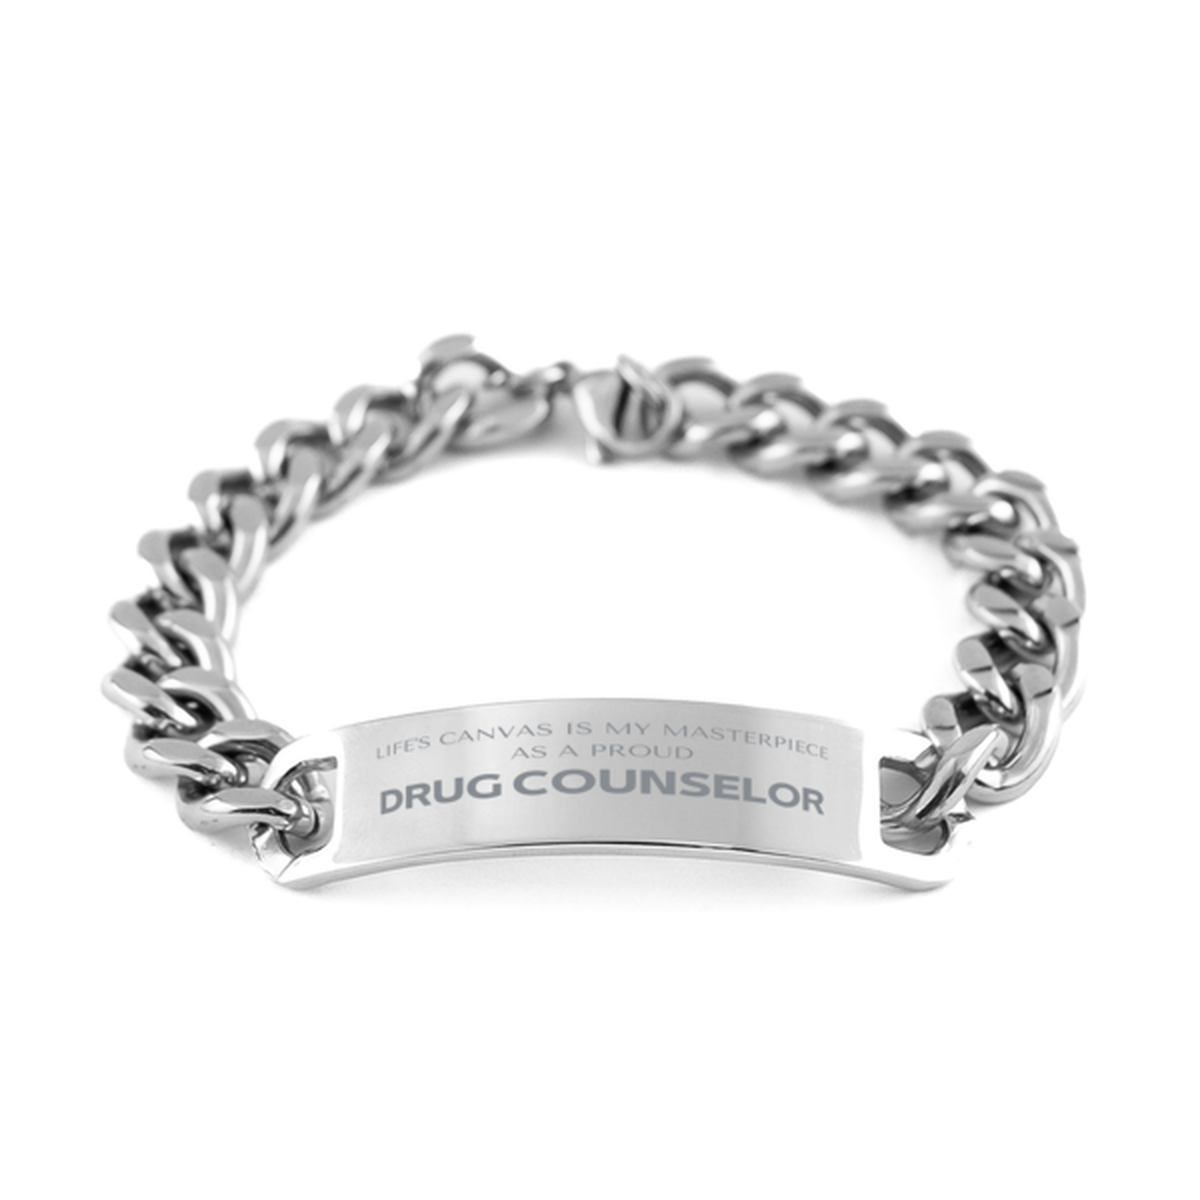 Proud Drug Counselor Gifts, Life's canvas is my masterpiece, Epic Birthday Christmas Unique Cuban Chain Stainless Steel Bracelet For Drug Counselor, Coworkers, Men, Women, Friends